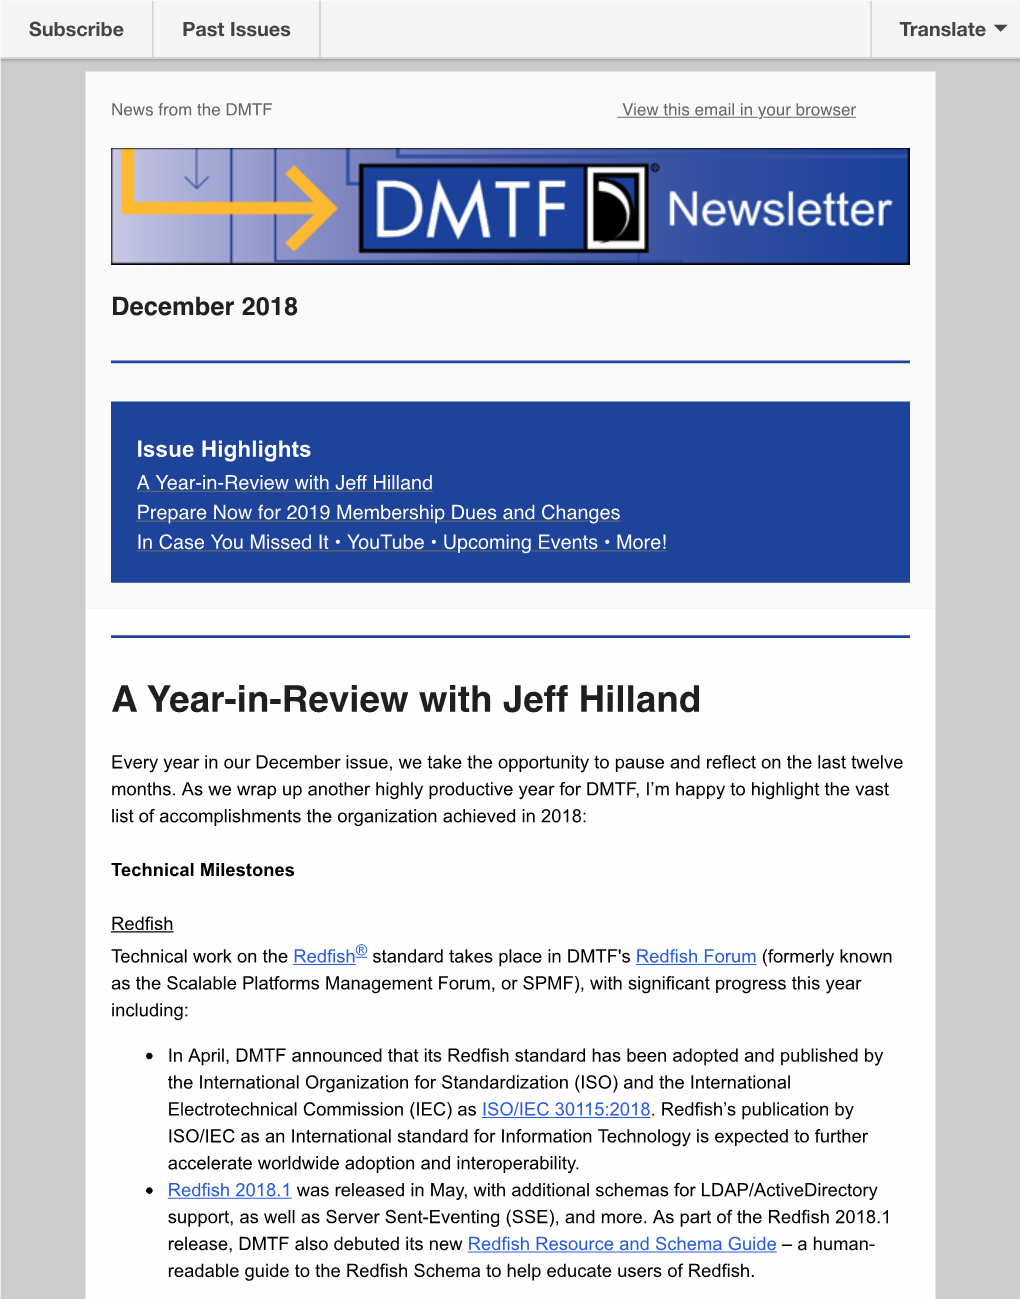 A Year-In-Review with Jeff Hilland Prepare Now for 2019 Membership Dues and Changes in Case You Missed It • Youtube • Upcoming Events • More!